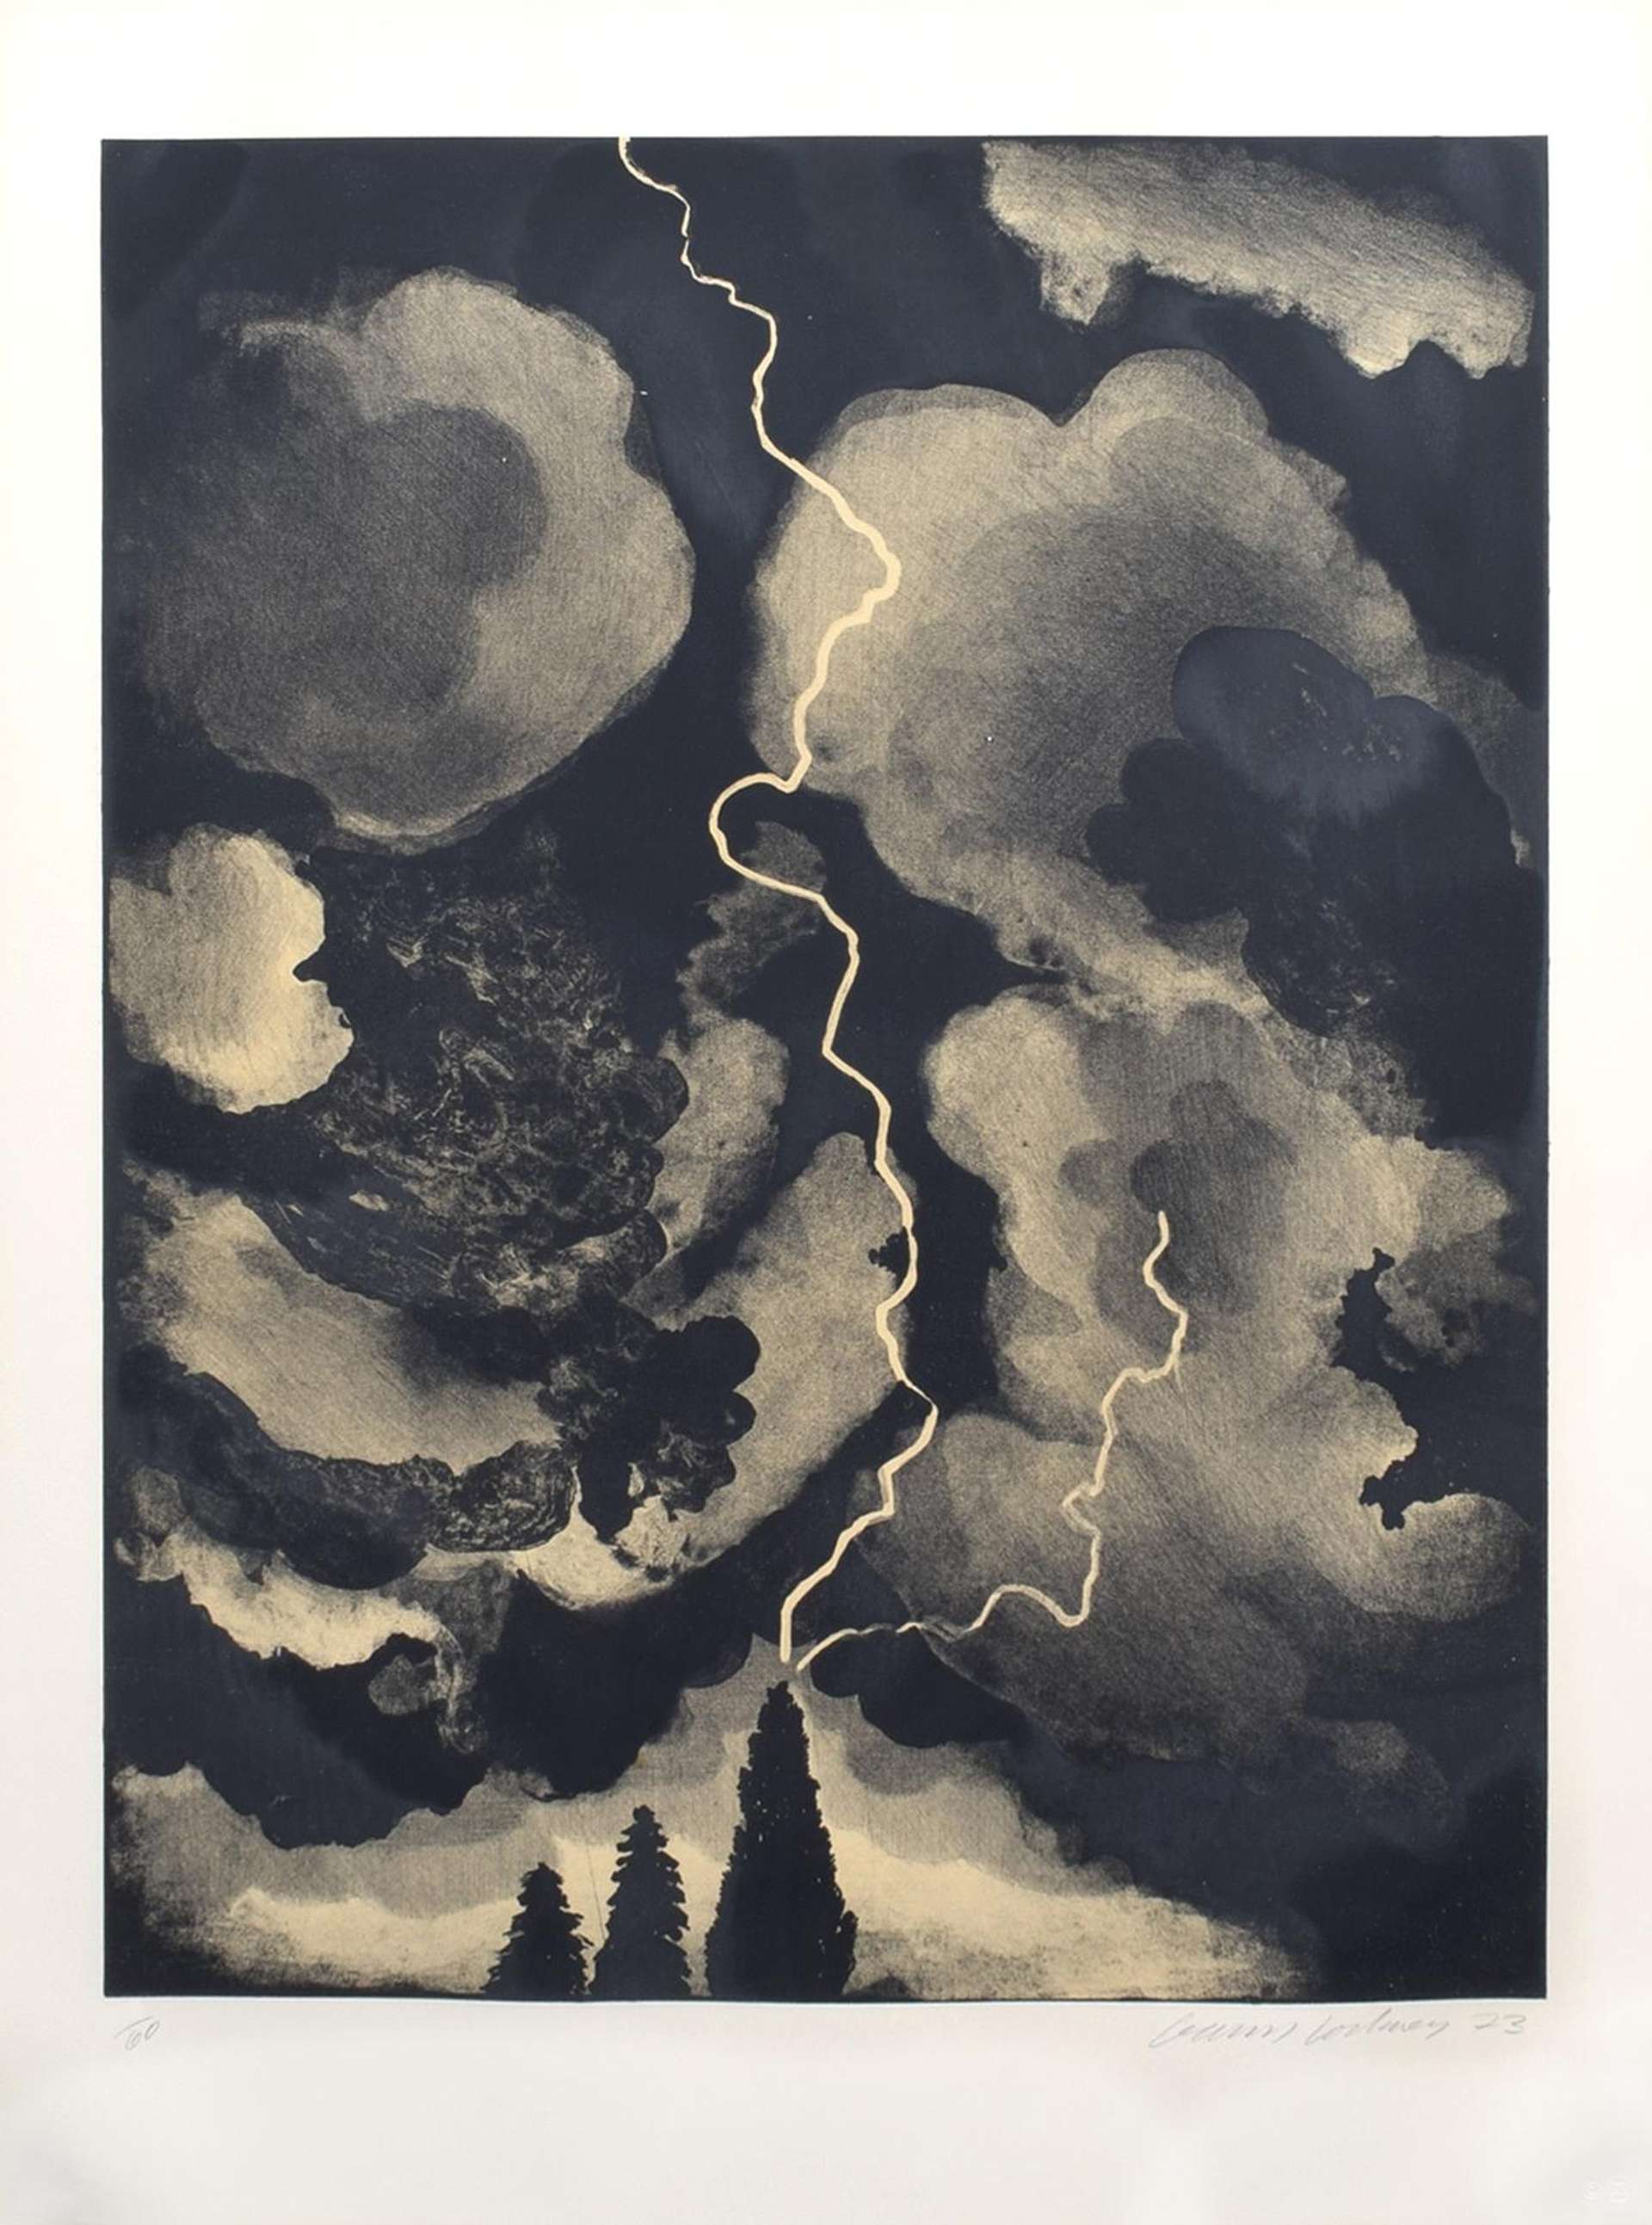 Swirls of inky black clouds crowd in from the sides of the image, split by a thread of lightning which appears to be about to strike the fir trees below. The composition is mostly sky and bordering on abstract, the clouds almost expressionist in their movement and transparency. 